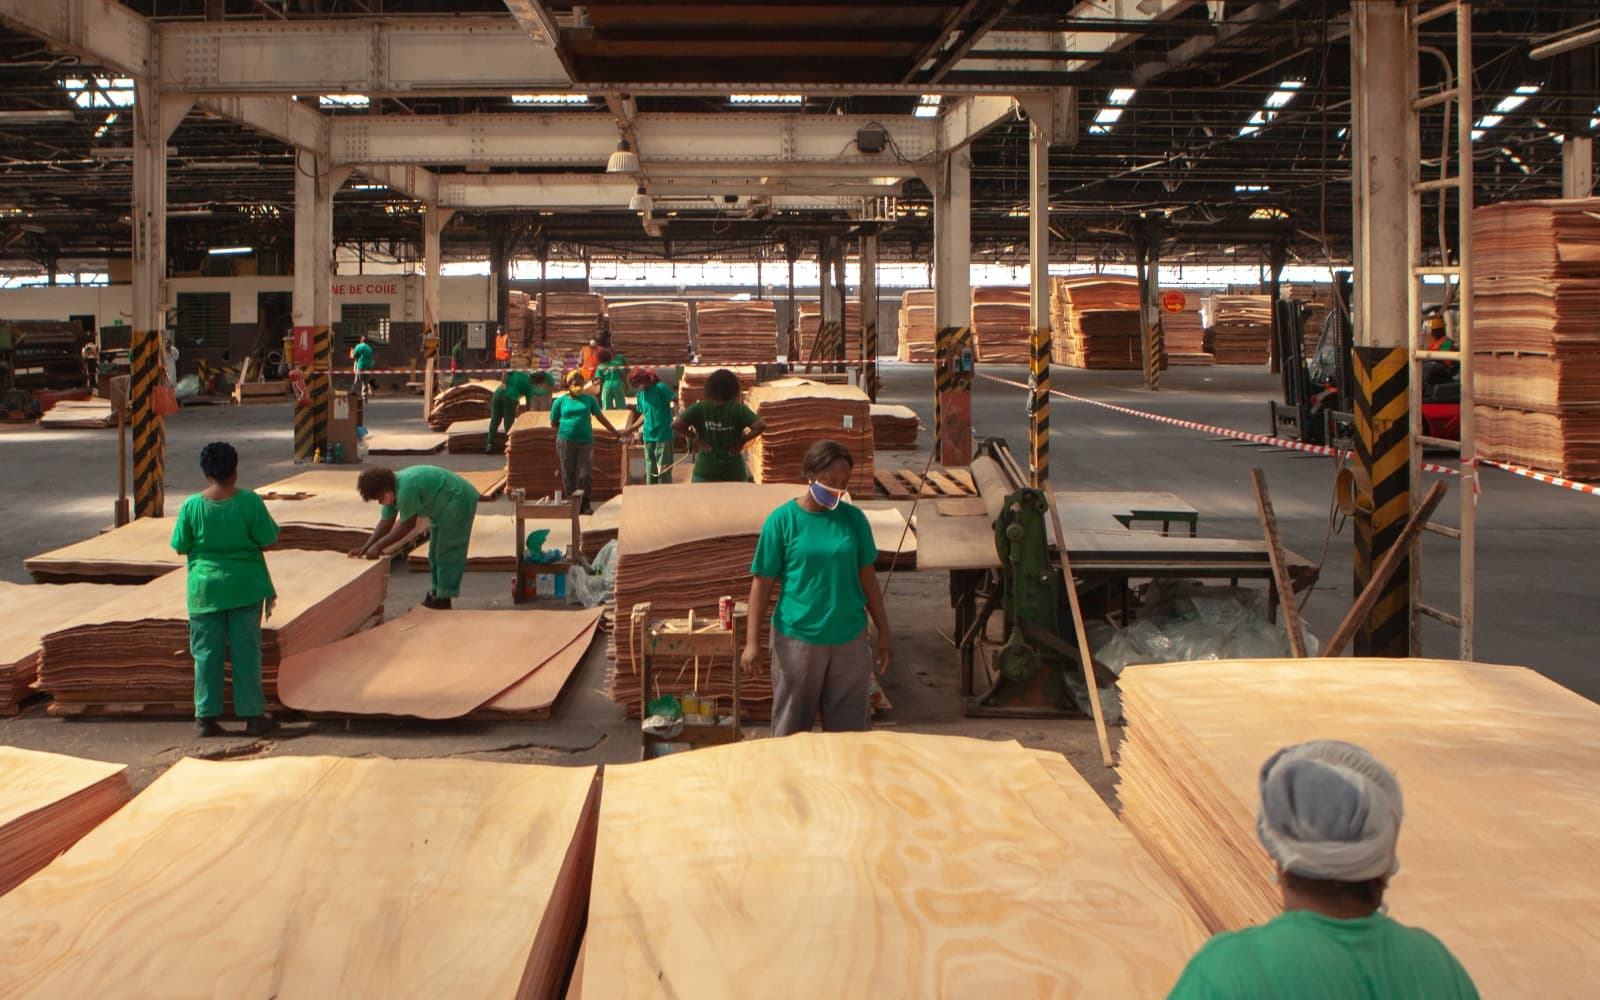 Grande Mayumba and Corà Wood Gabon to form Joint Venture to strengthen Forestry and Timber Businesses